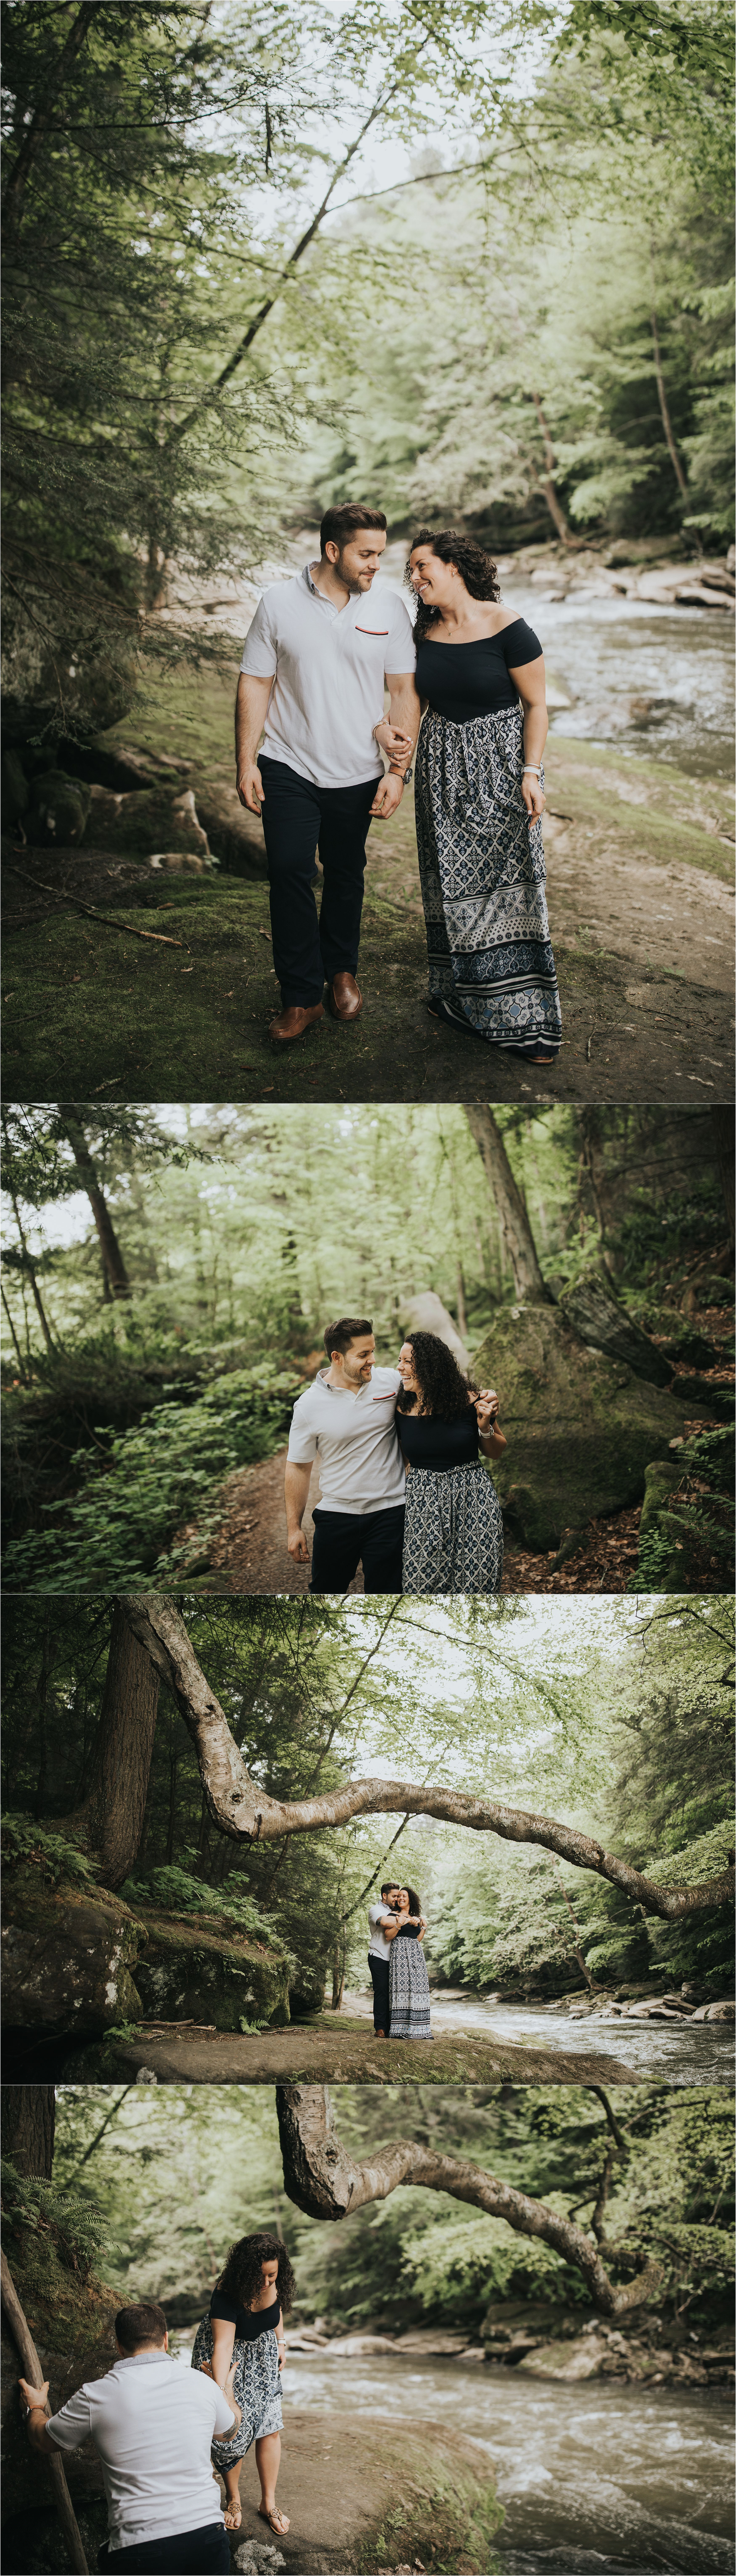 mcconnells mill engagement session.jpg